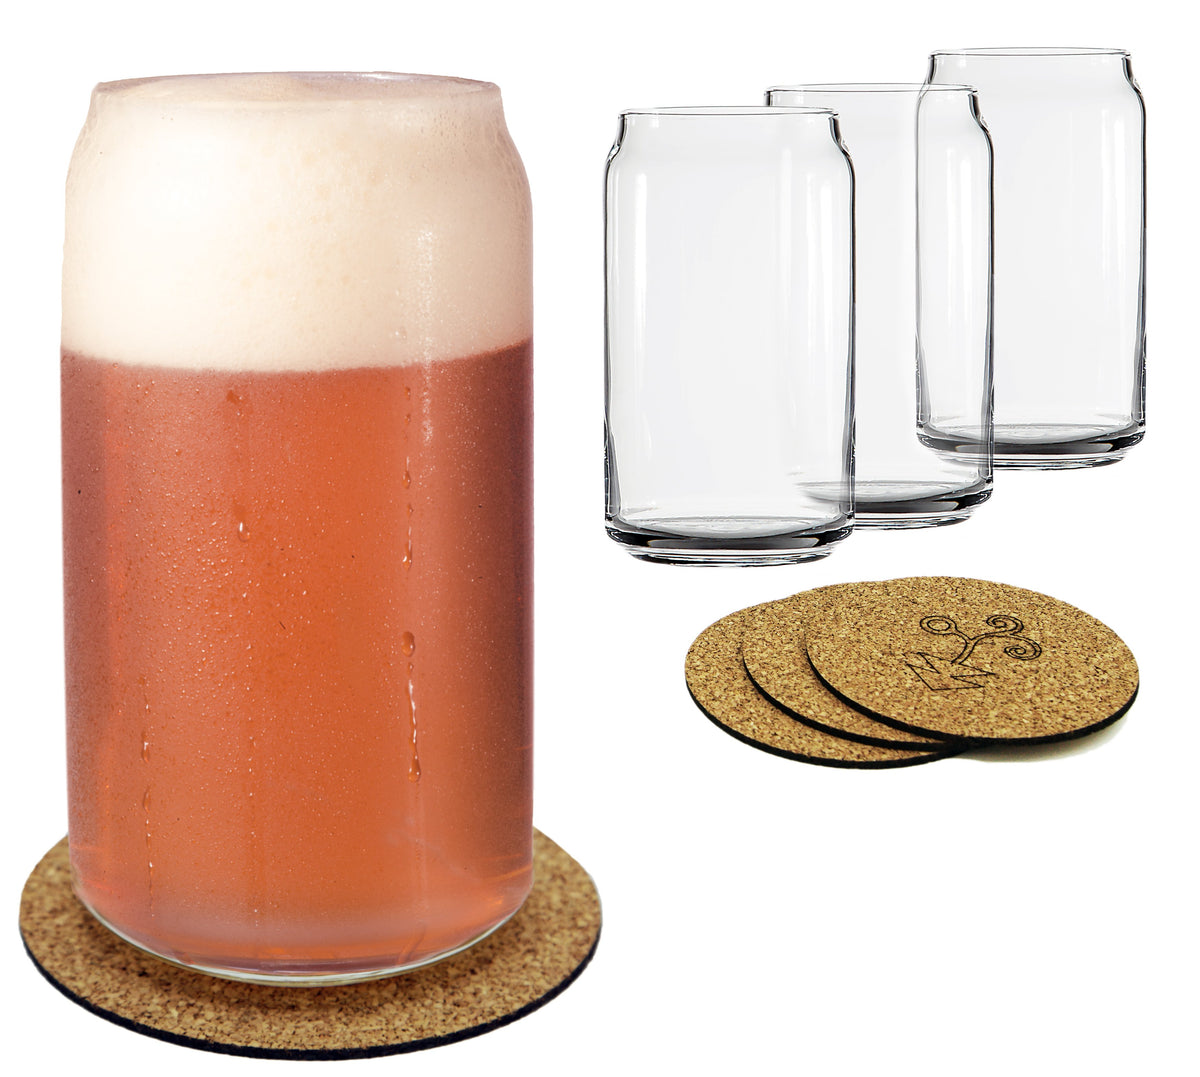 16 Oz. ARC Can Shaped Beer Glasses